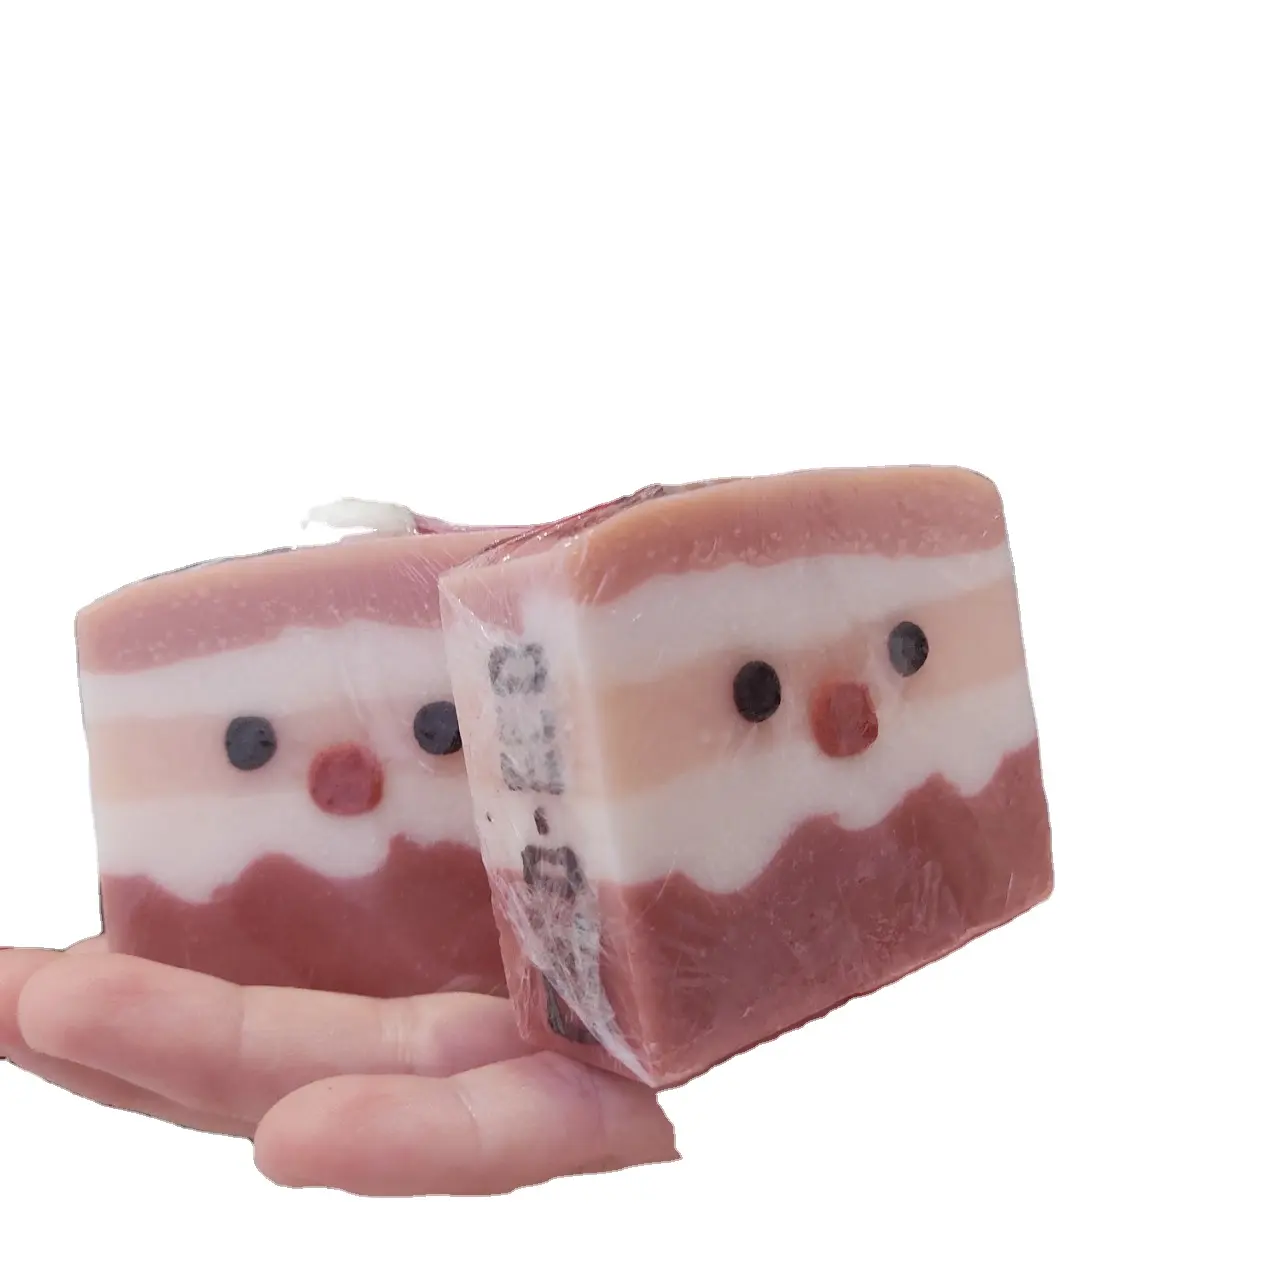 The Best 2022 Choice For OEM/ODM 100 g Transparent Soap Selling Handmade / Soap made by hand - COCO ECO BRAND